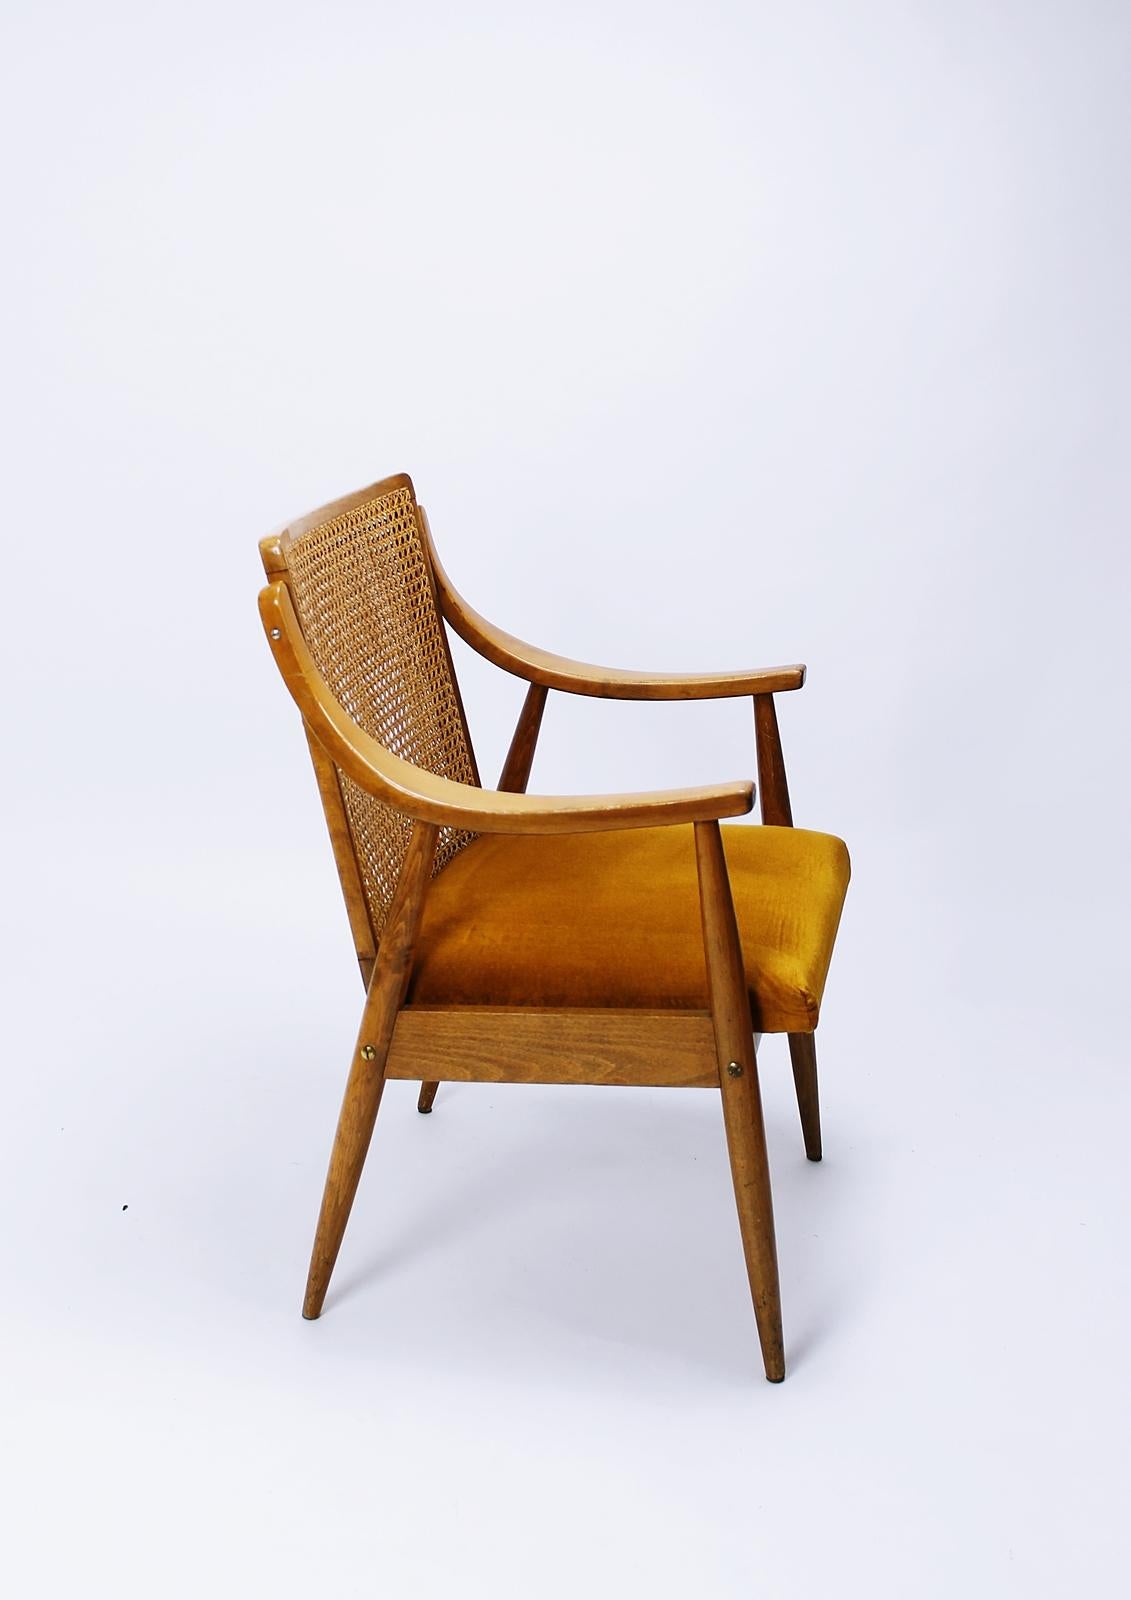 Gorgeous, sculptural Midcentury Hungarian armchair in oak with caned back in style of Peter Hvidt and Orla Mølgaard-Nielsen, circa 1960. Chair is signed with the typical metal tag of MSZMP. Warm, rich patina and in very good original condition.